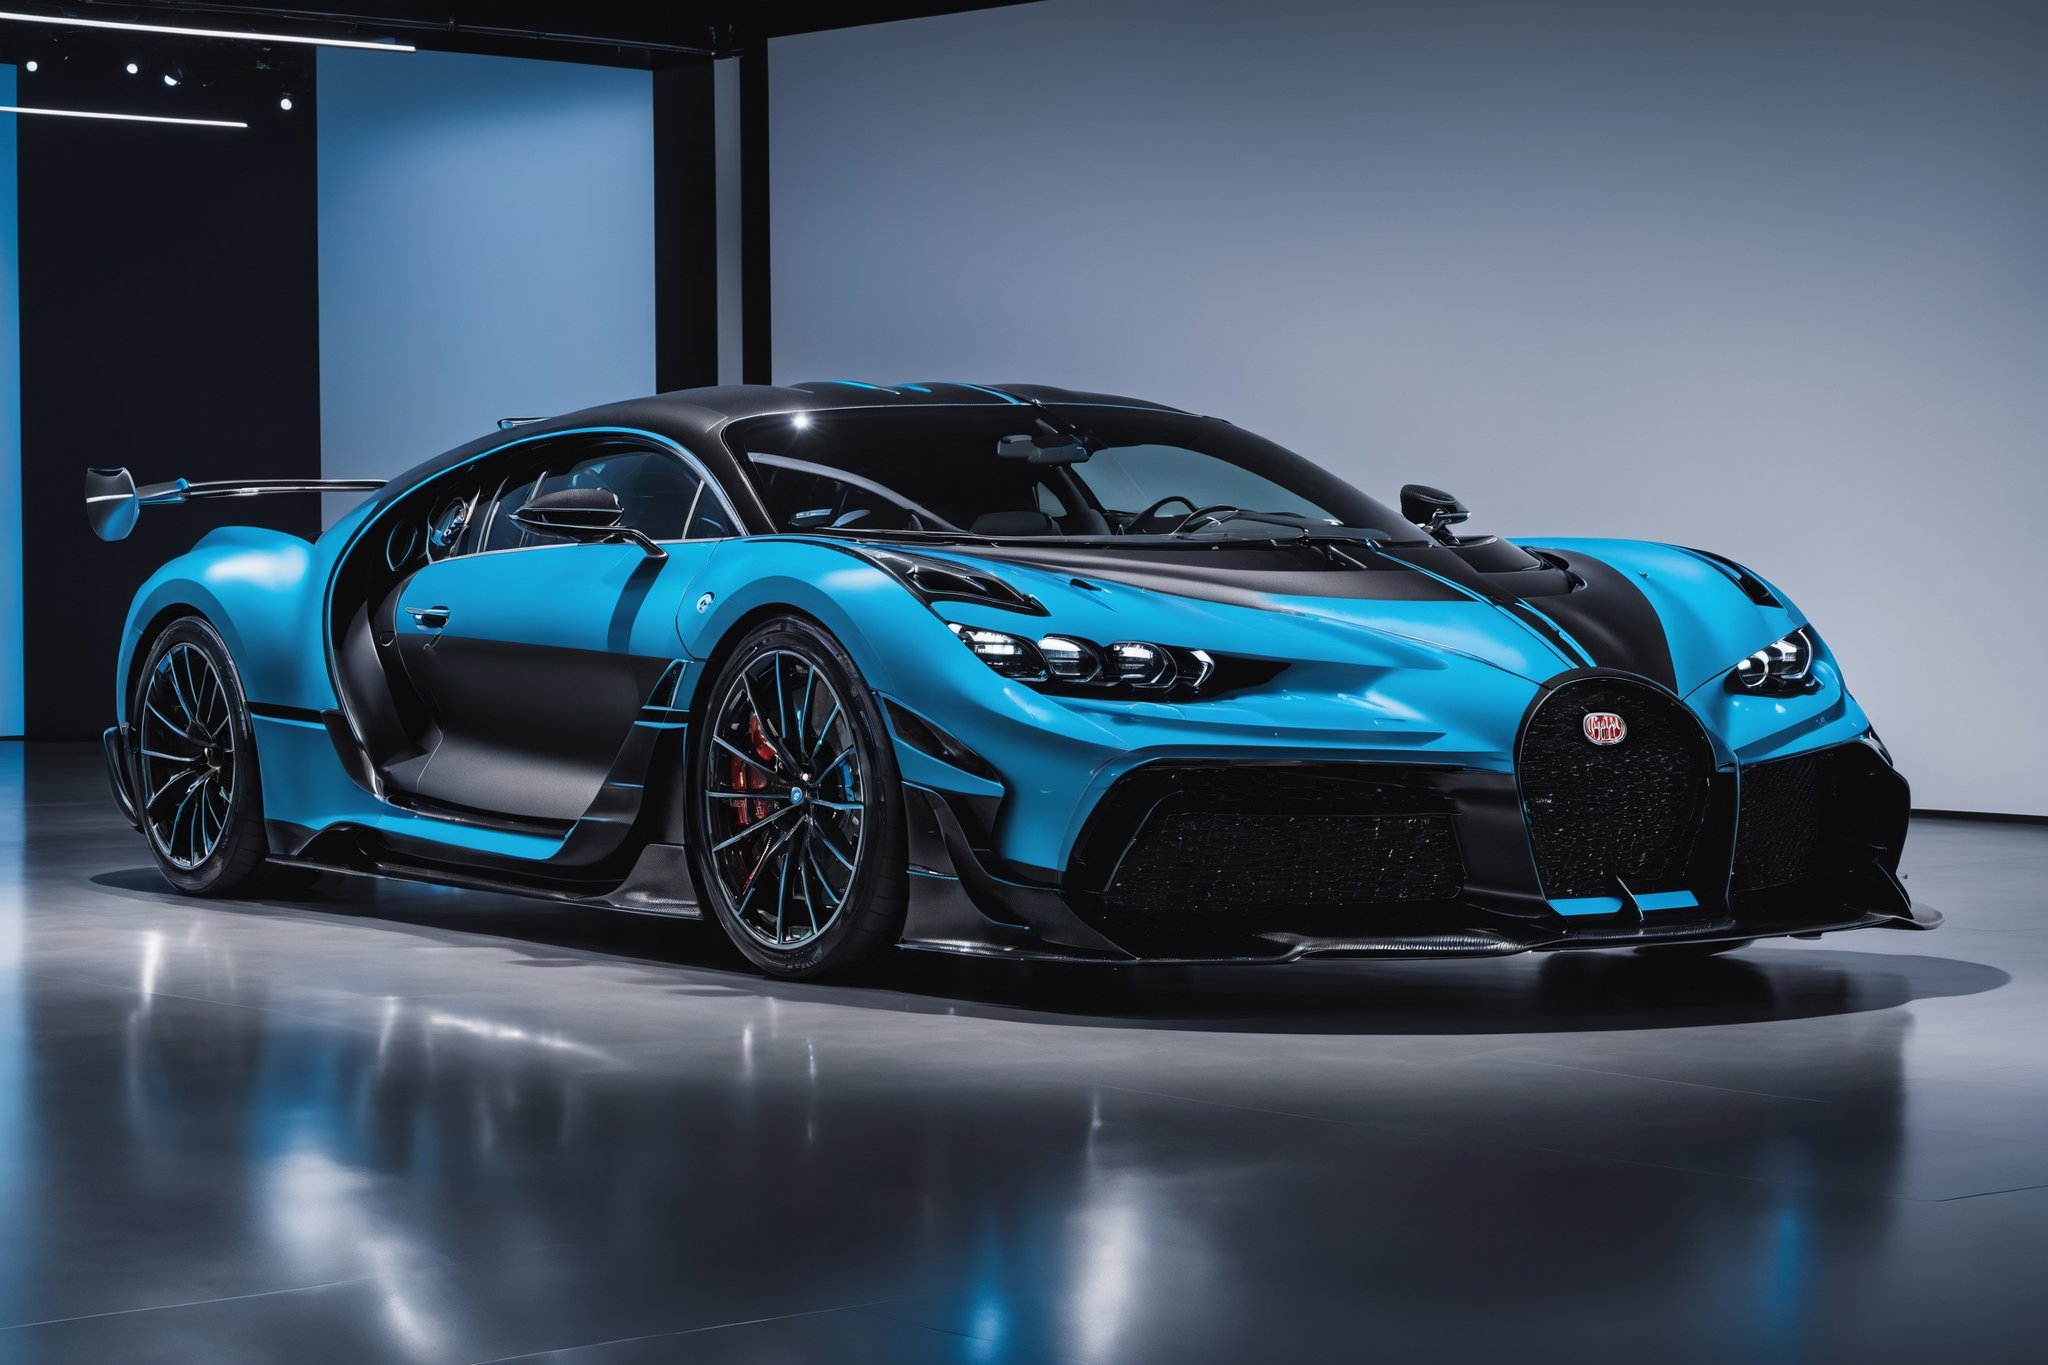 RAW phontograph of bugatti divo car, carbon fiber body, black car, cool, asthetic, ,full car in frame, full car picture, highly detaited, 8k, 1000mp,ultra sharp, master peice, realistic,detailed grills, detailed headlights,4k grill, 4k headlights, sitting in car showroom, beautiful lighting 